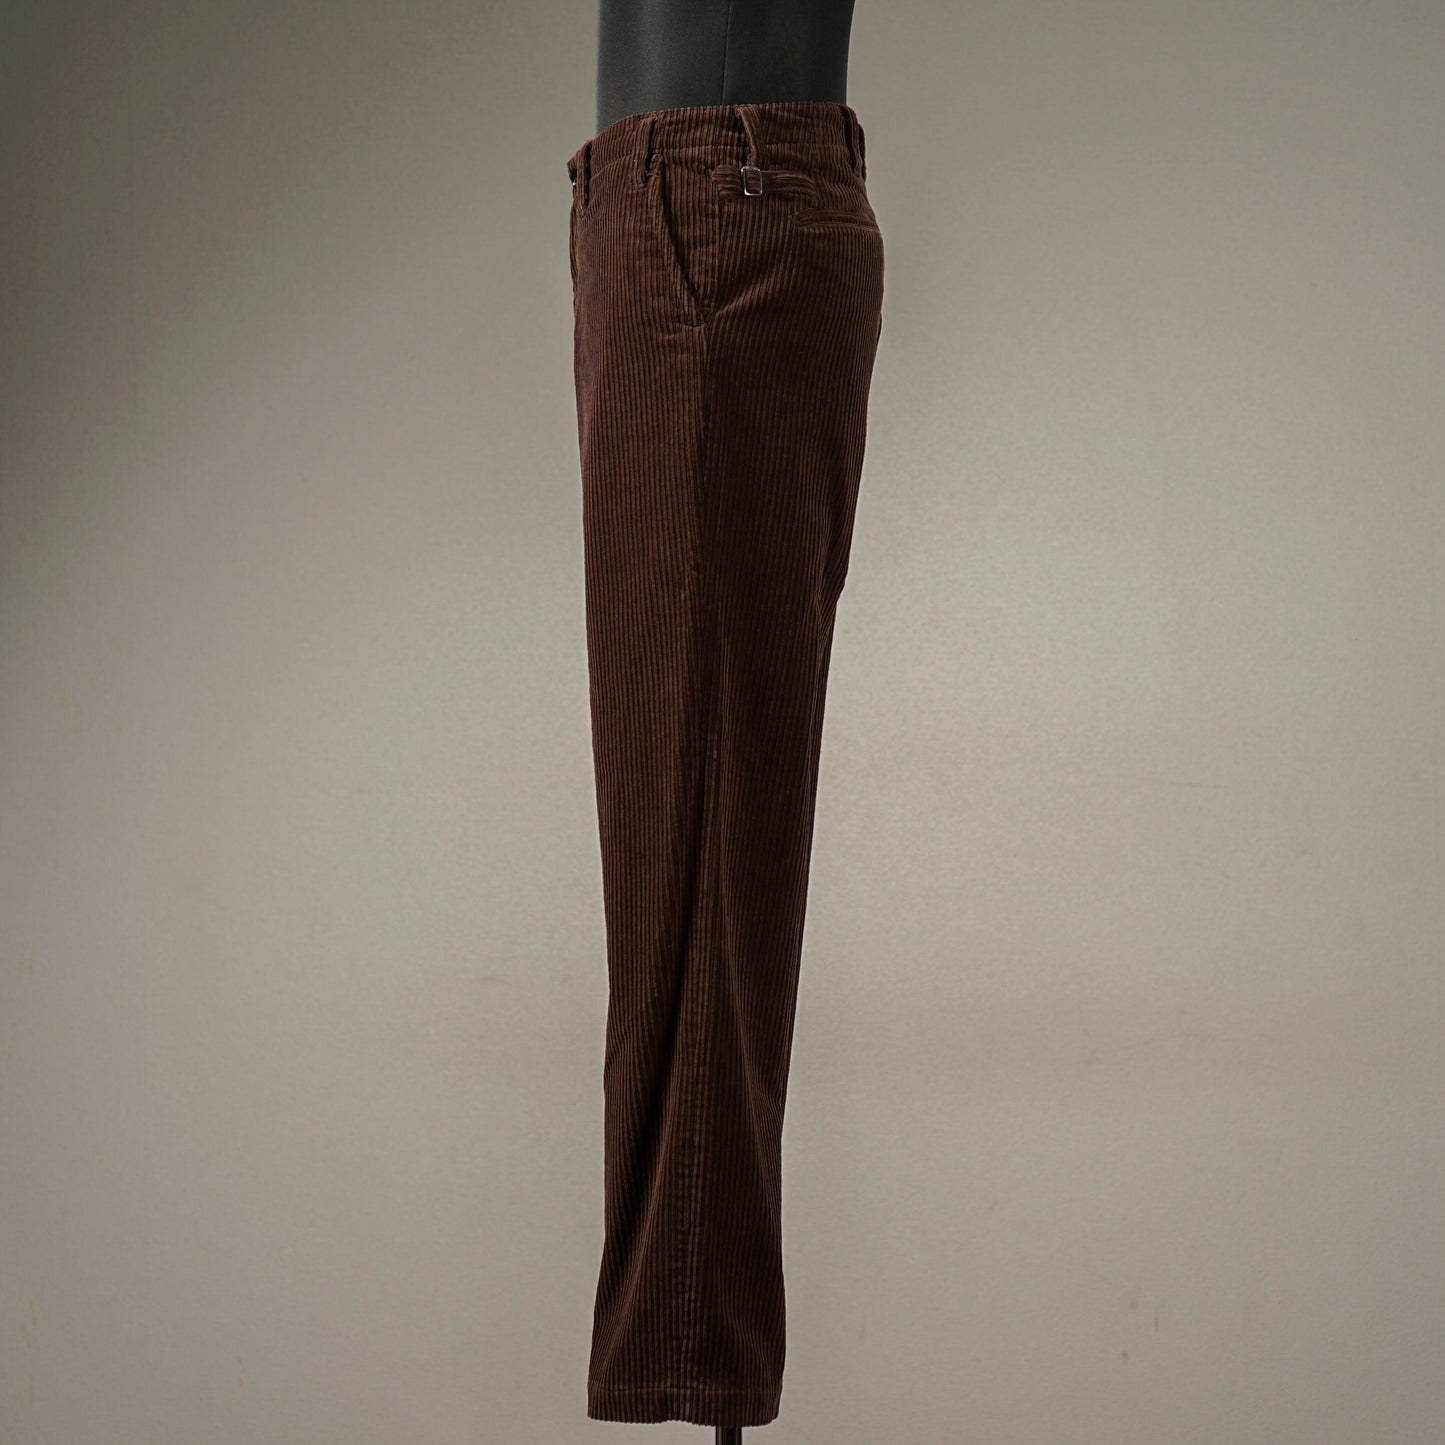 LOWELL - PANTS / BYGH-23-AW-06